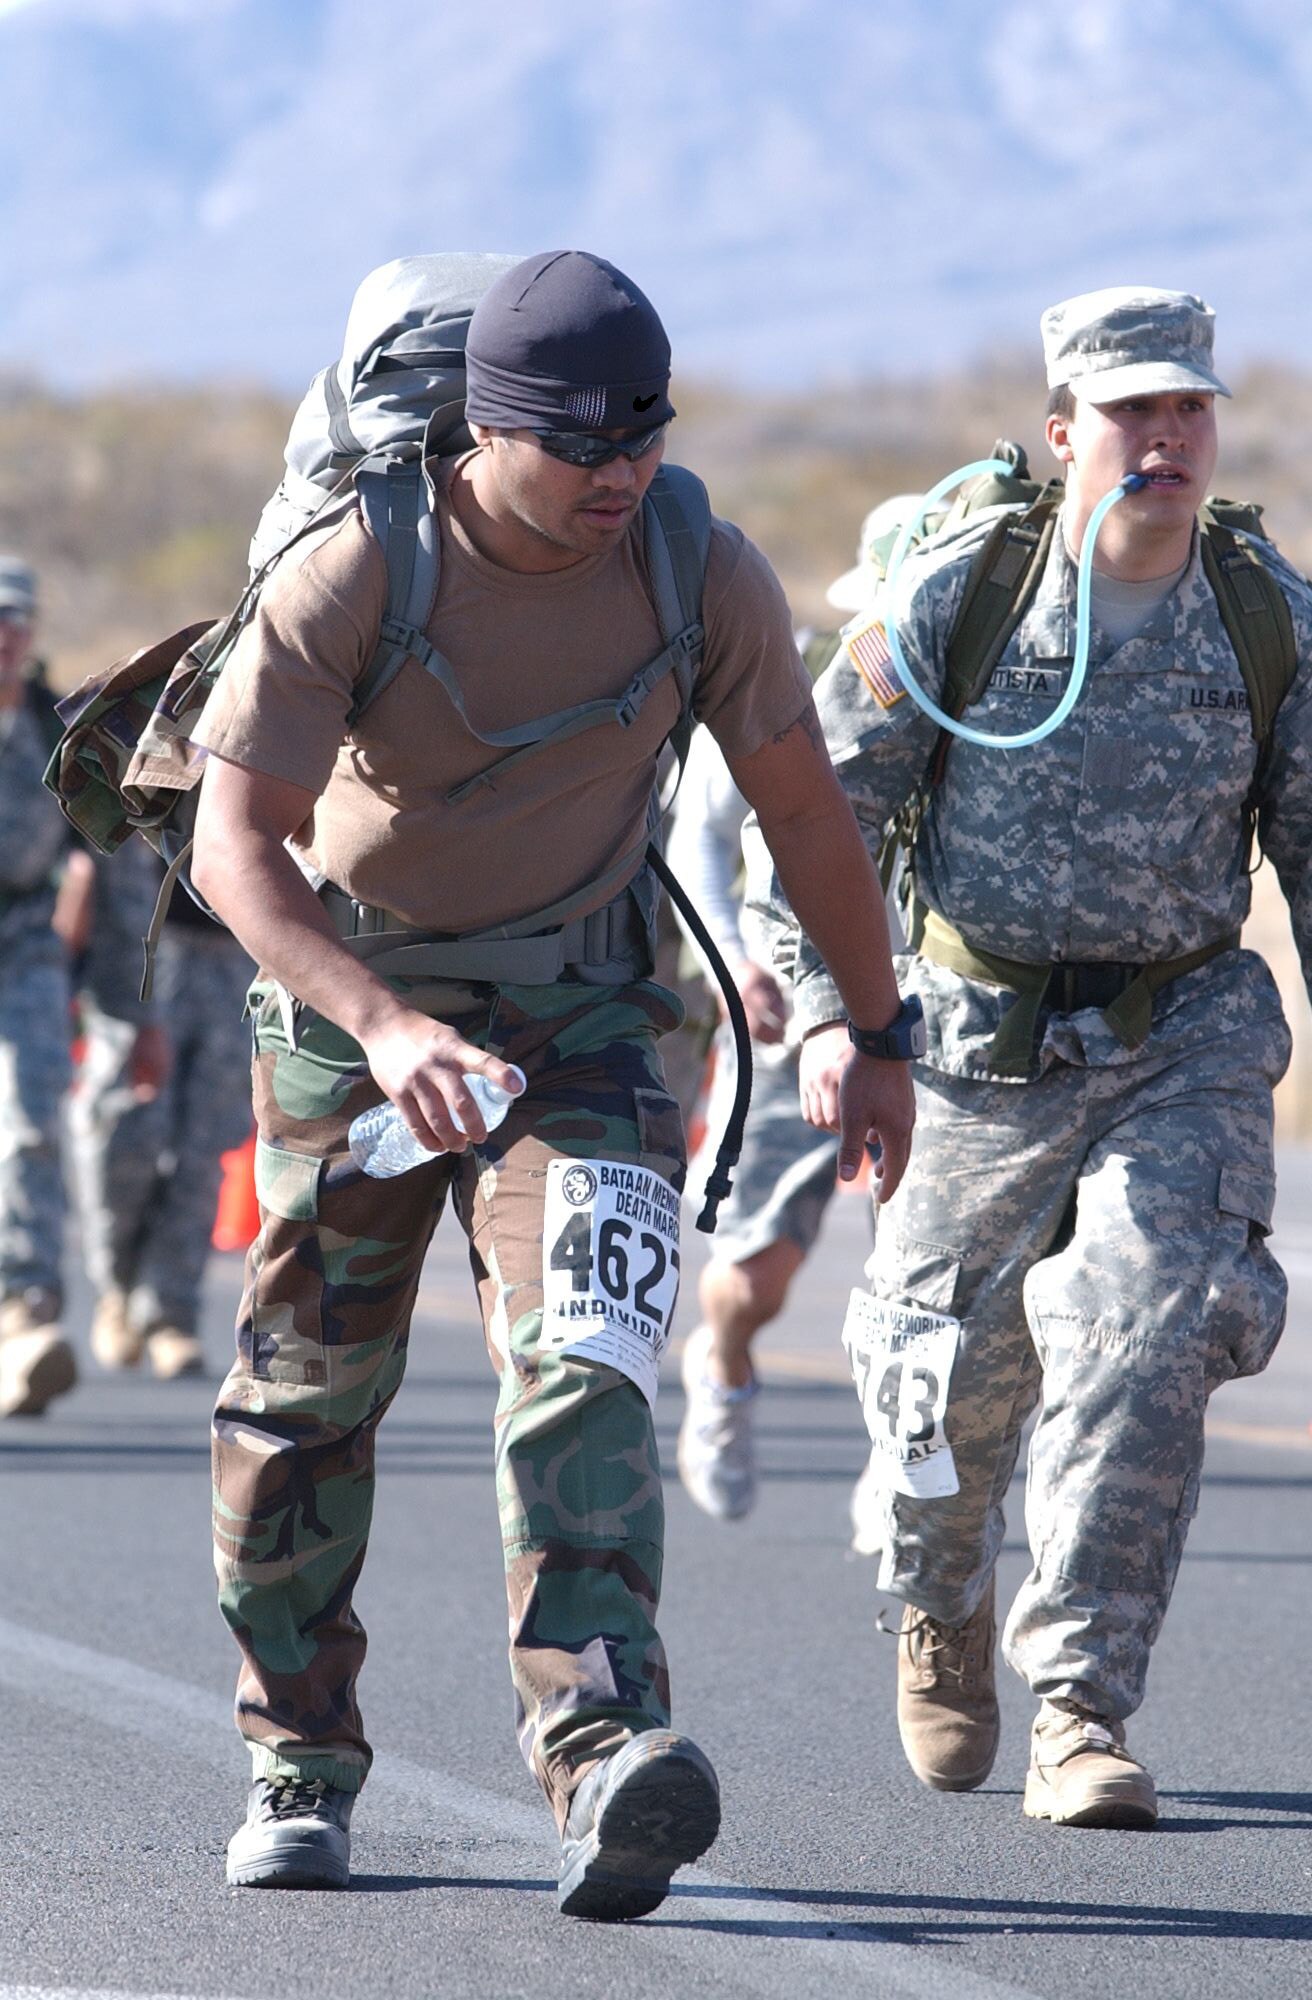 Sergeant Bautista, left, tackles Mile 13, one of the many difficult ascents on the course
conquered. He and the ROTC member on the right, also named Bautista, chatted and
kept each other company for a mile or two.  (Courtesy photo)